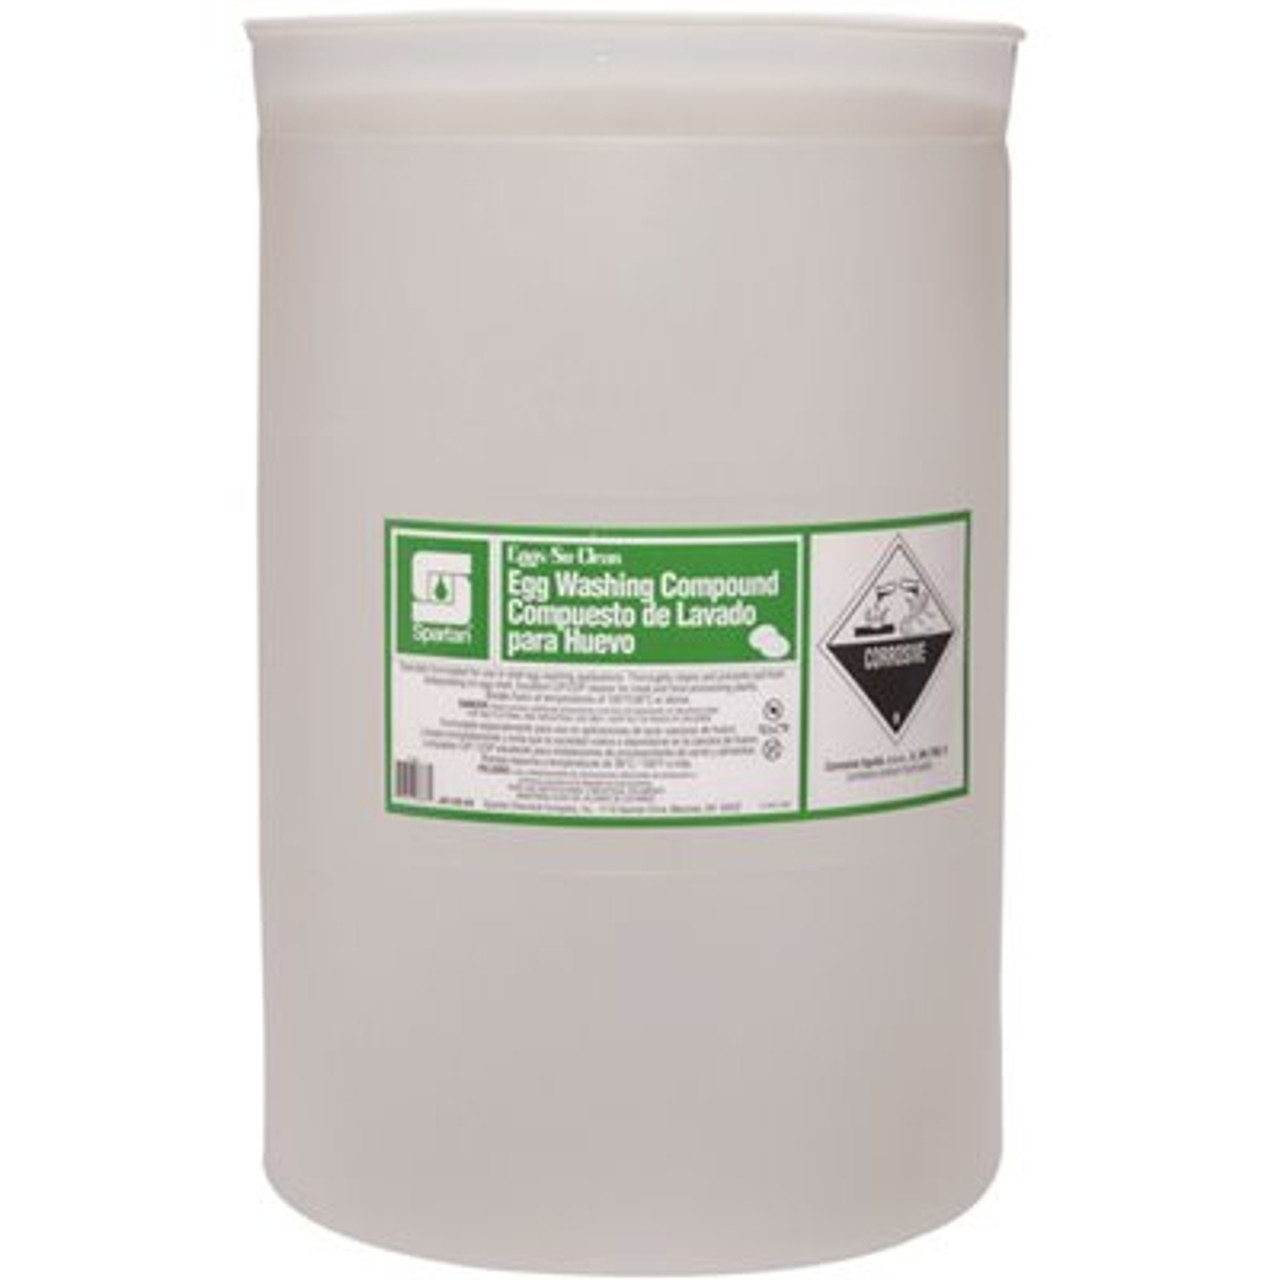 Spartan Chemical Company Eggs-So-Clean Egg Washing Compound 55 Gallon Food Production Sanitation Cleaner